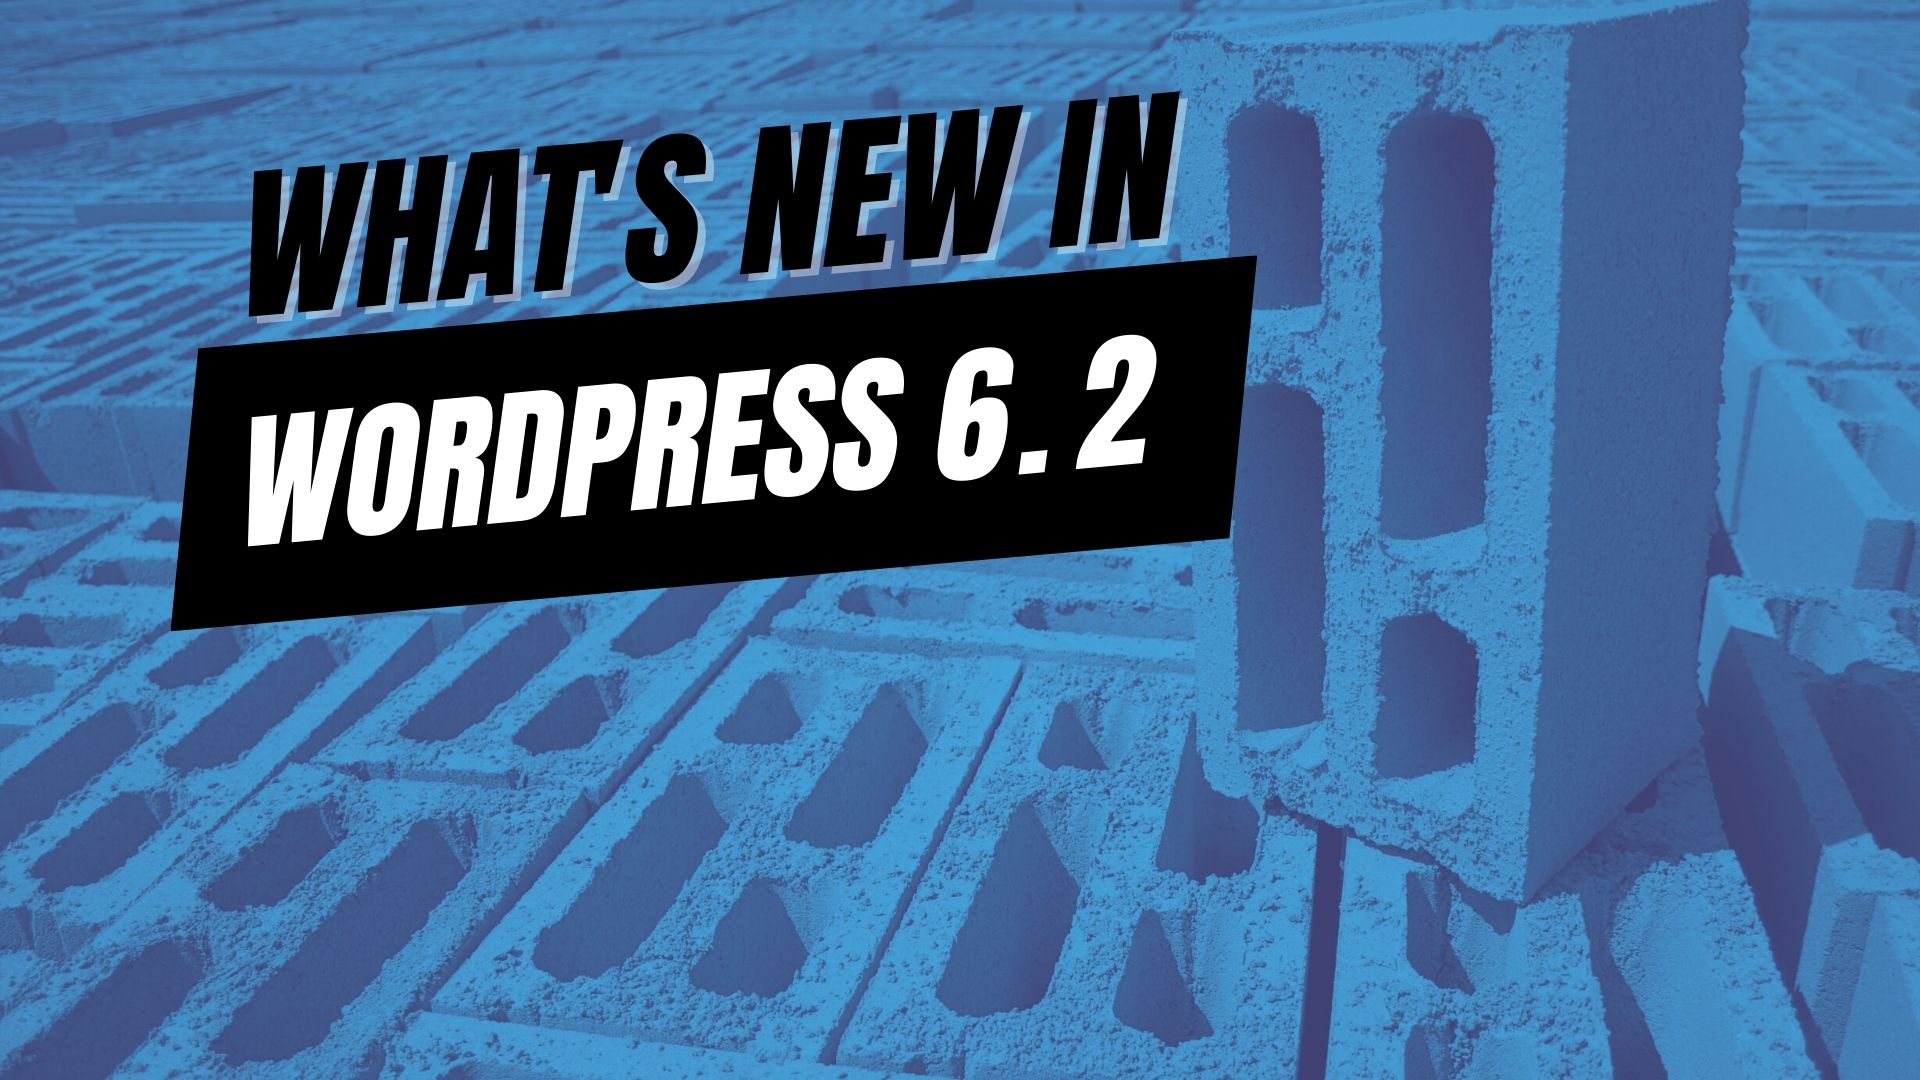 EP447 – What’s New in WordPress 6.2?